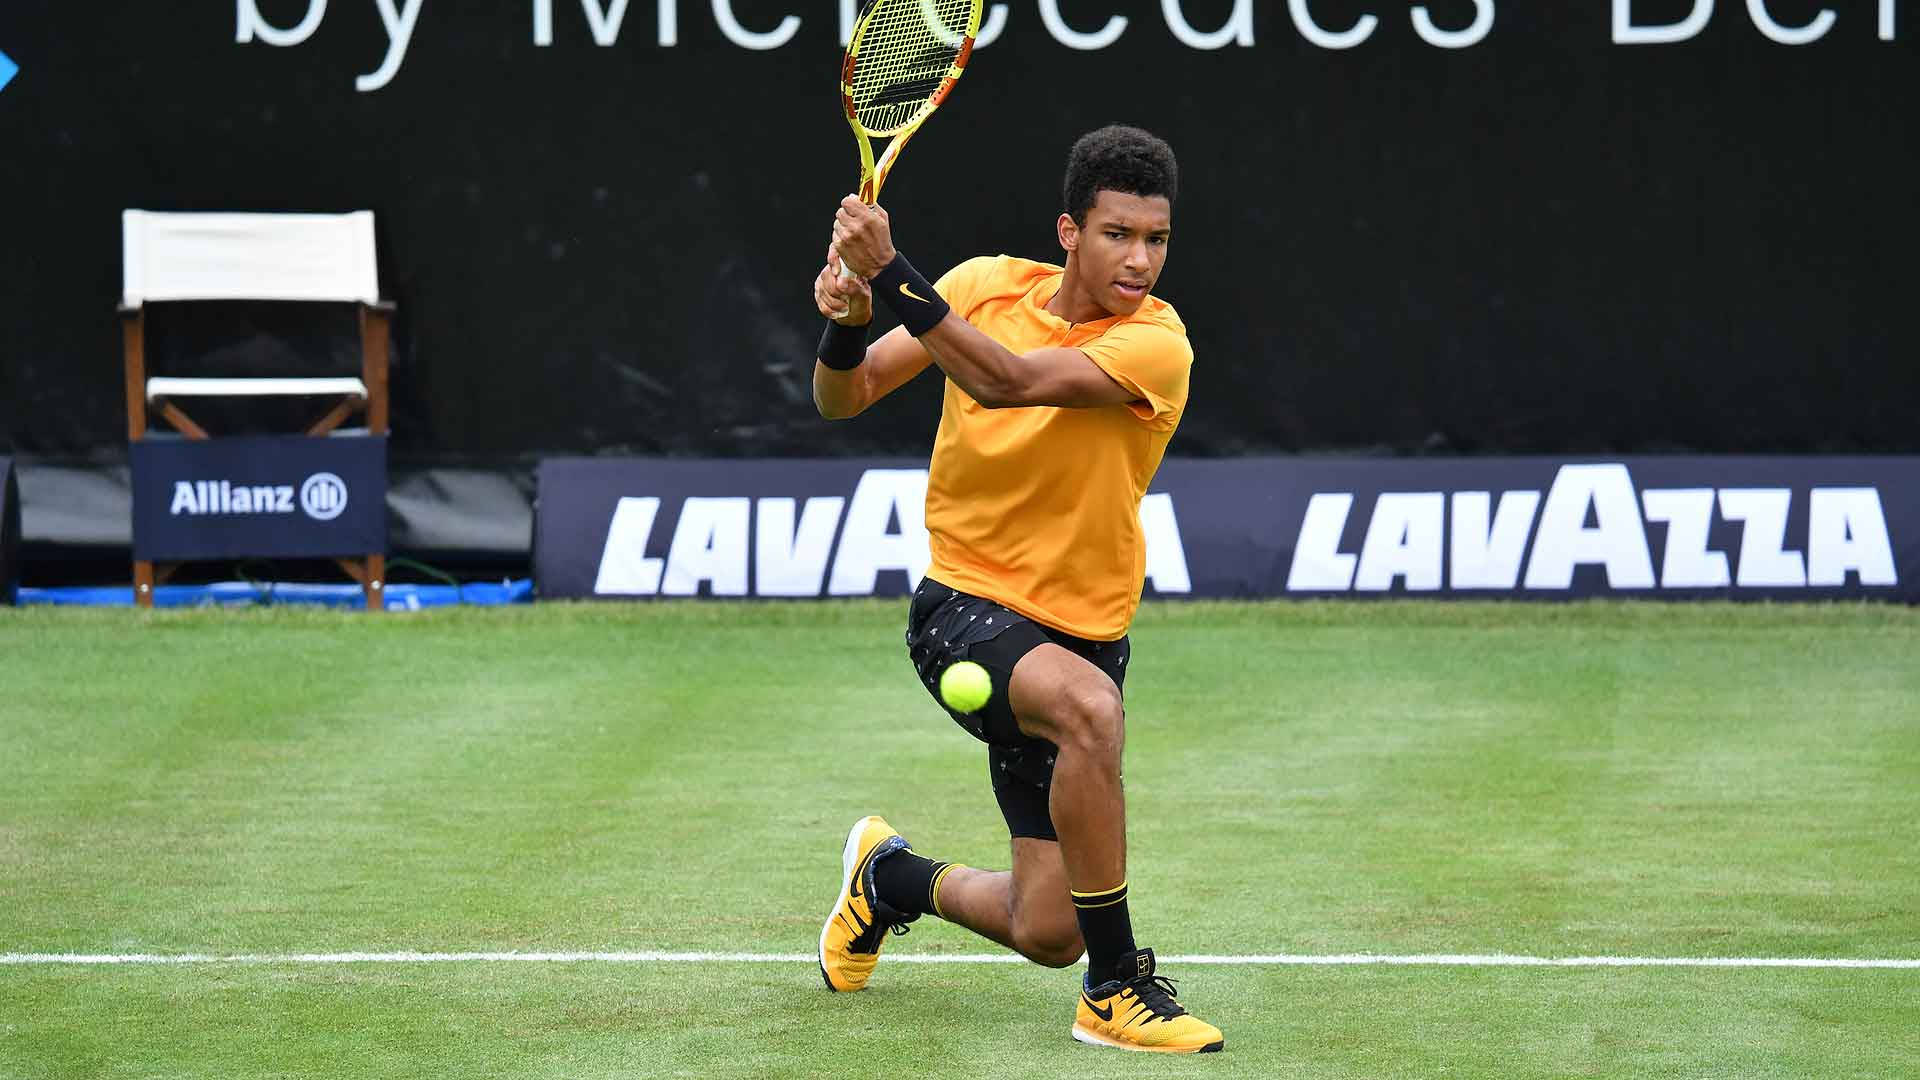 Felix Auger-Aliassime in action on the tennis court Wallpaper